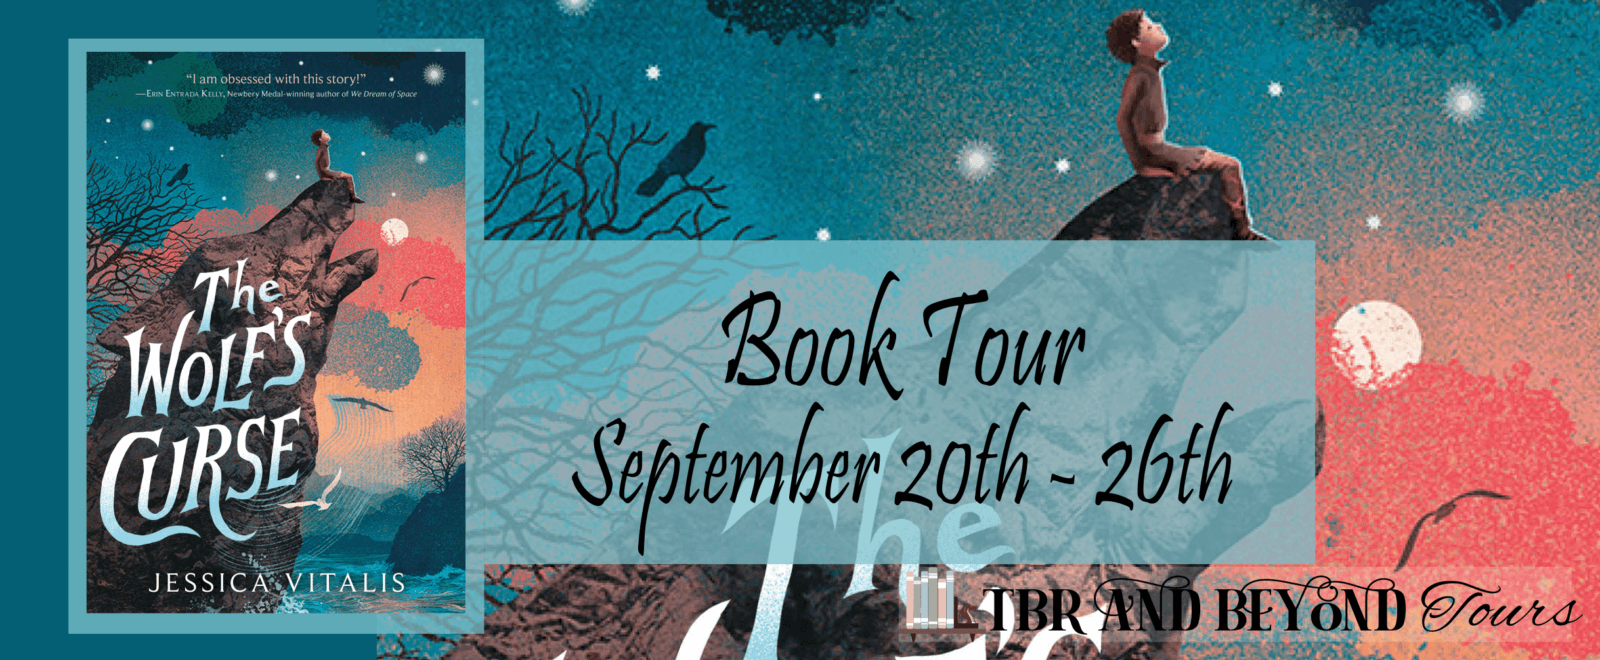 The Wolf’s Curse by Jessica Vitalis TBR & Beyond Blog Tour ● Interview with Jessica